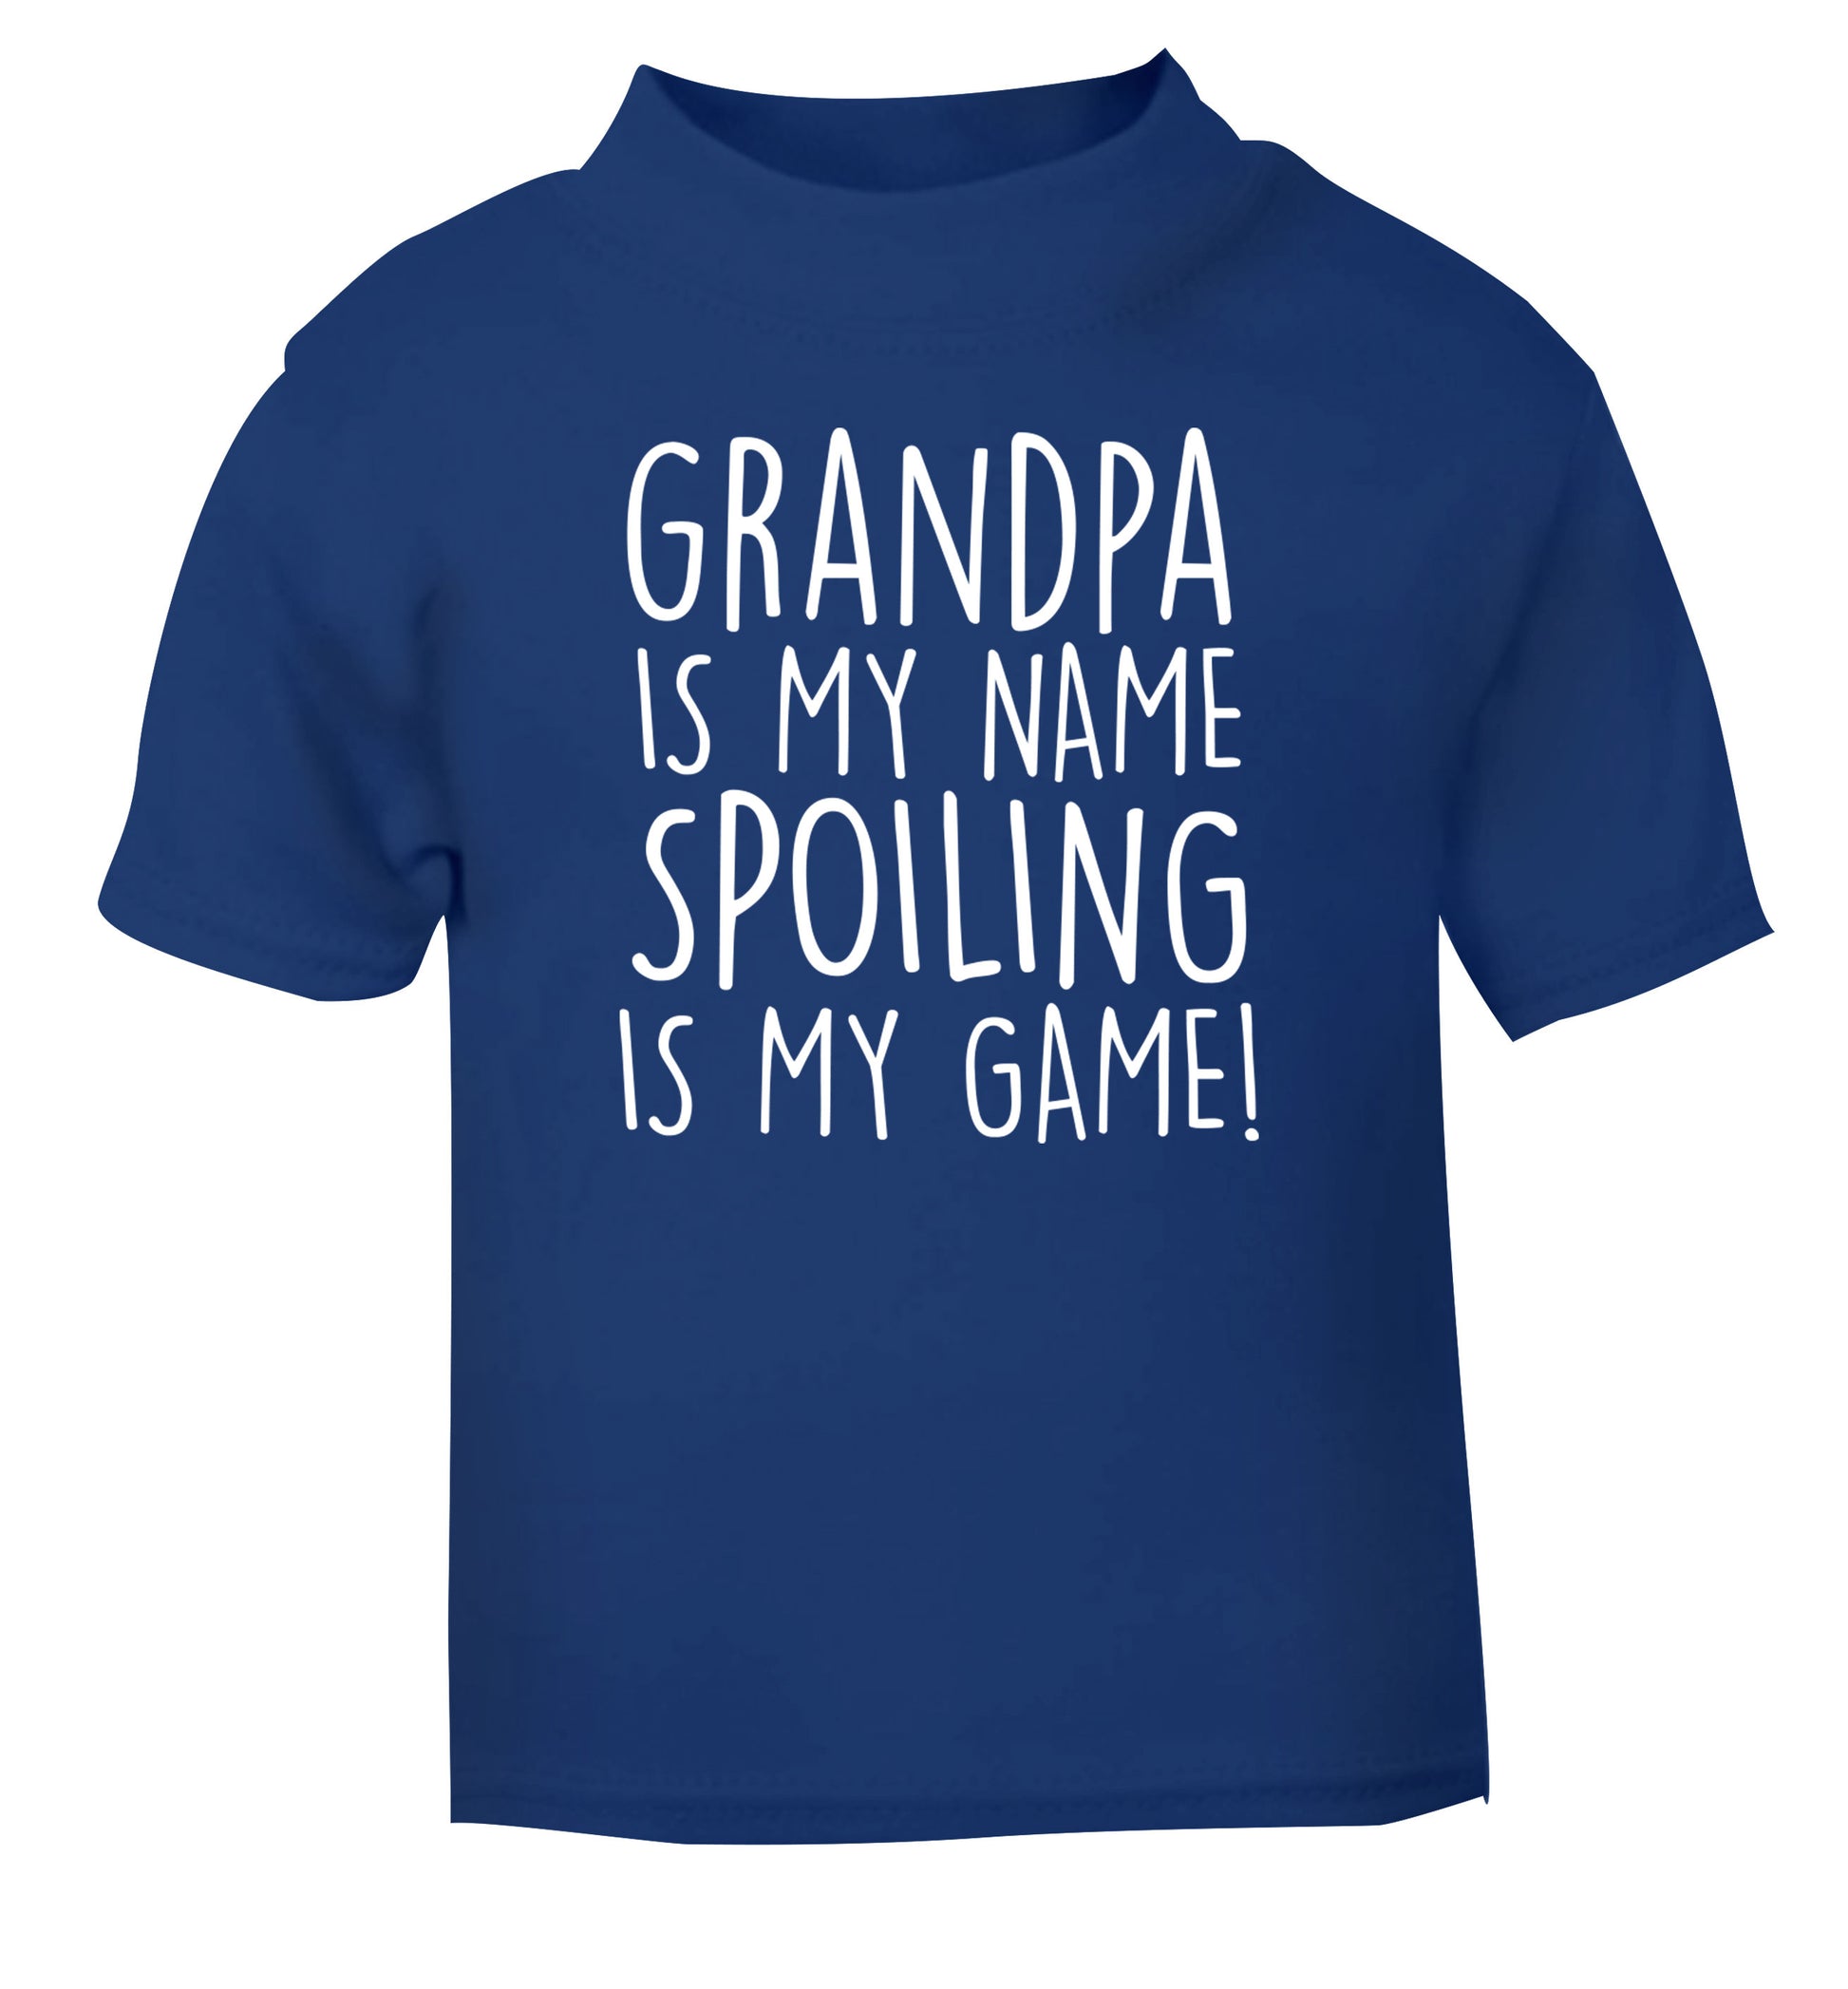 Grandpa is my name, spoiling is my game blue Baby Toddler Tshirt 2 Years